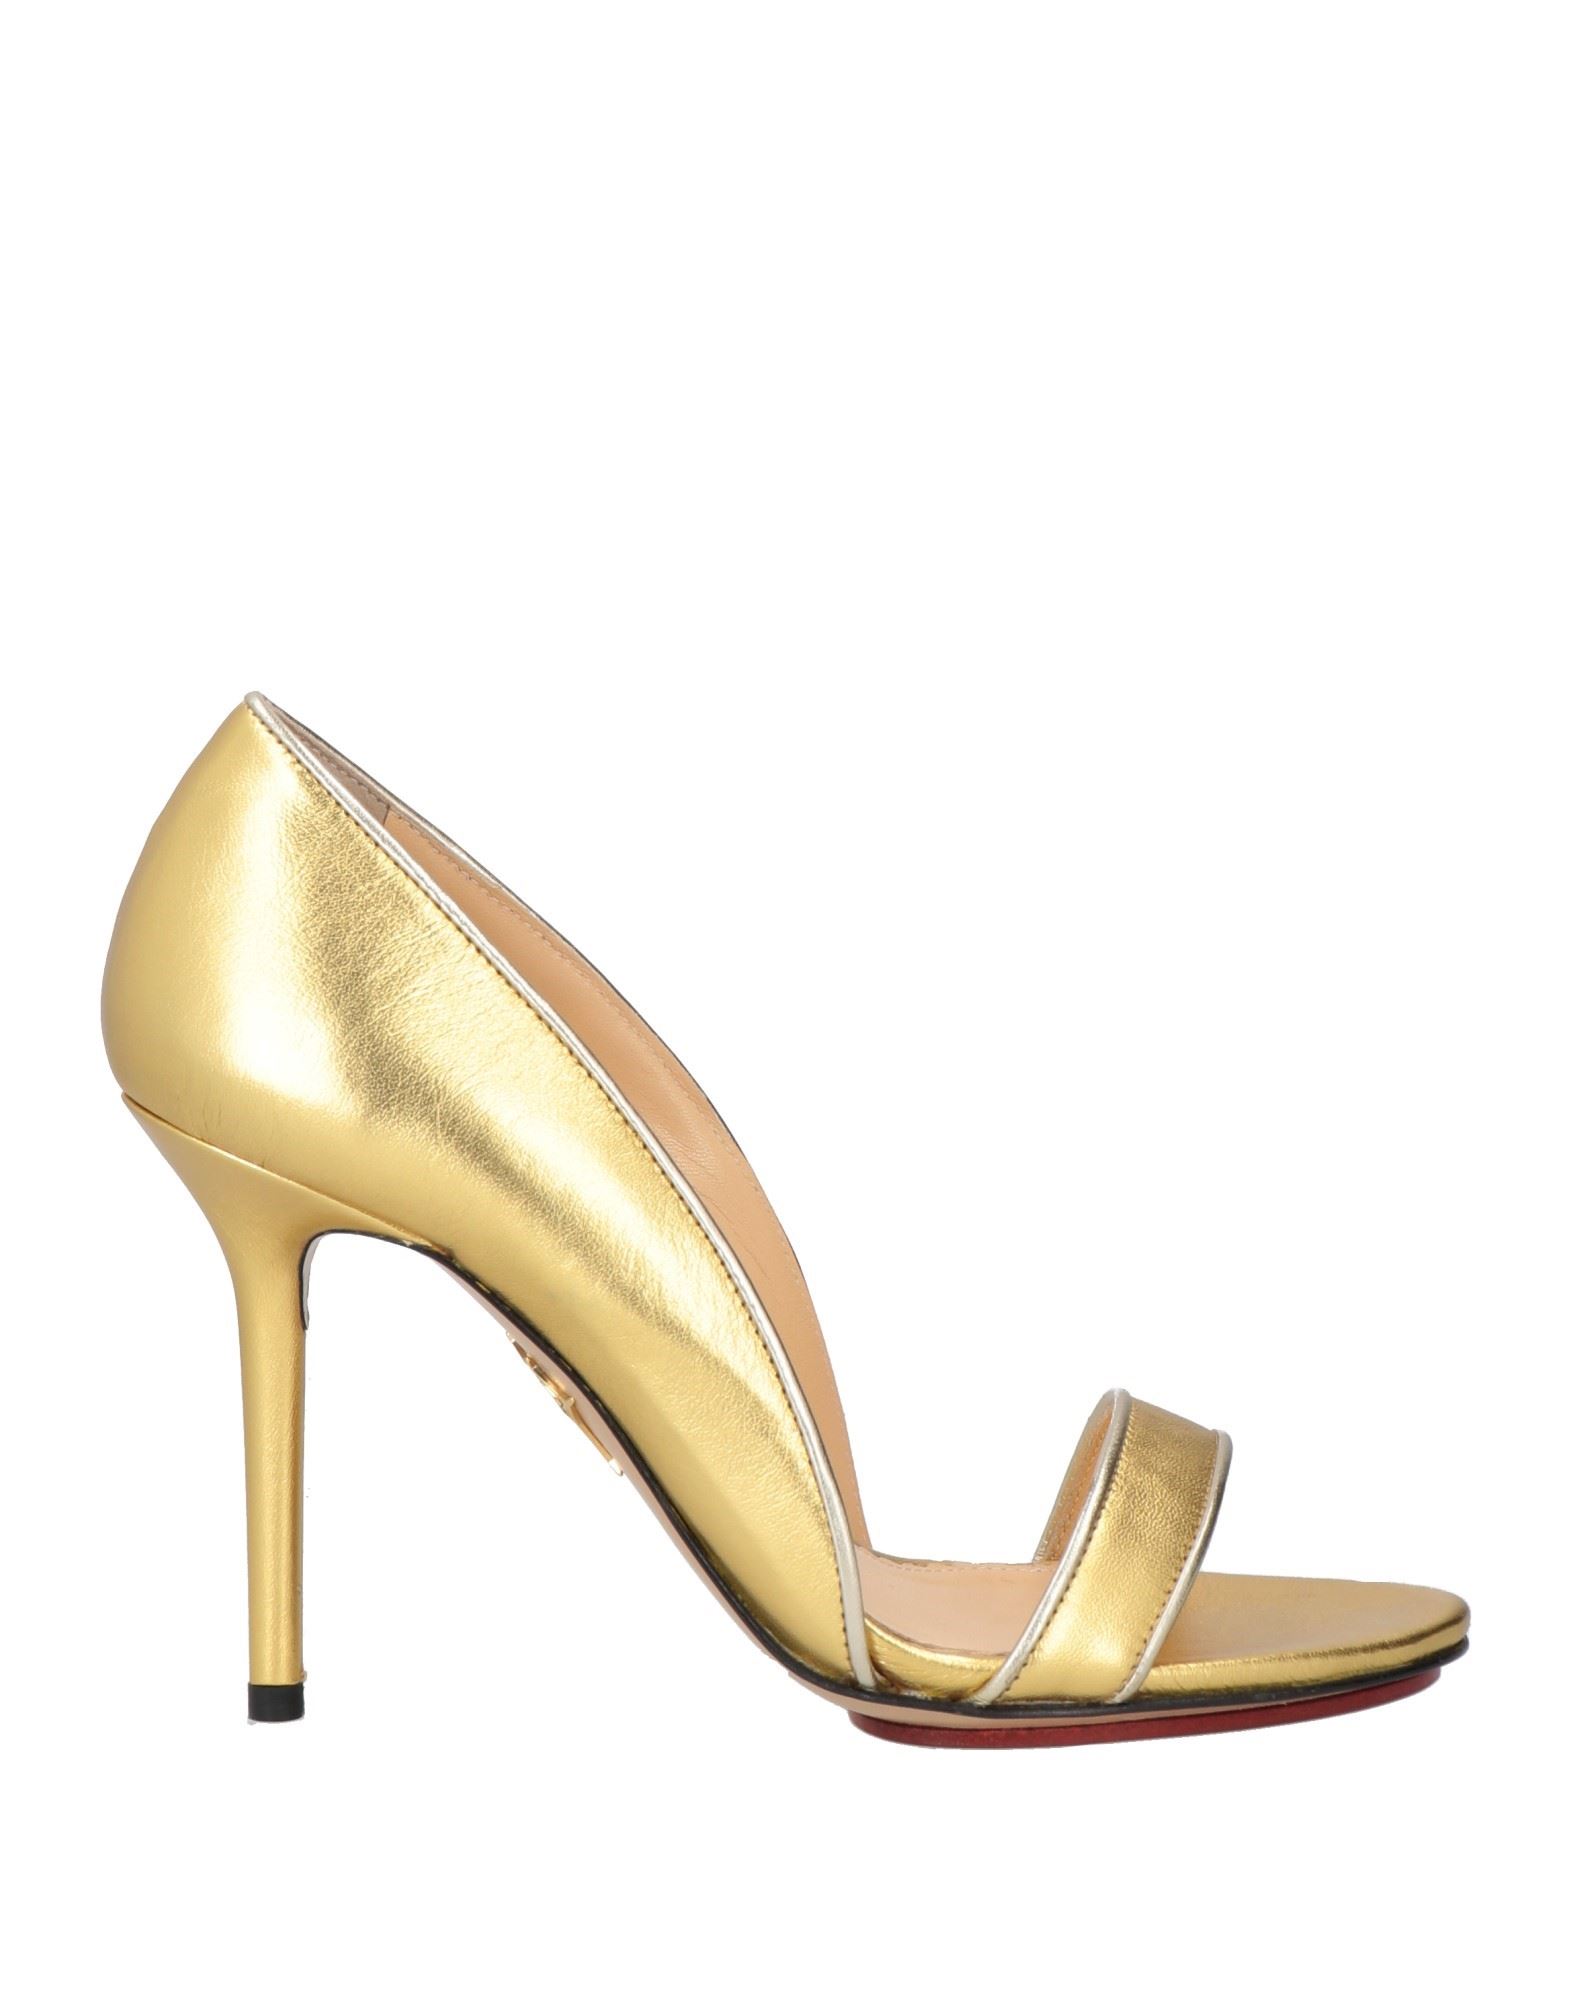 CHARLOTTE OLYMPIA CHARLOTTE OLYMPIA WOMAN SANDALS GOLD SIZE 6.5 SOFT LEATHER,11487394UL 11